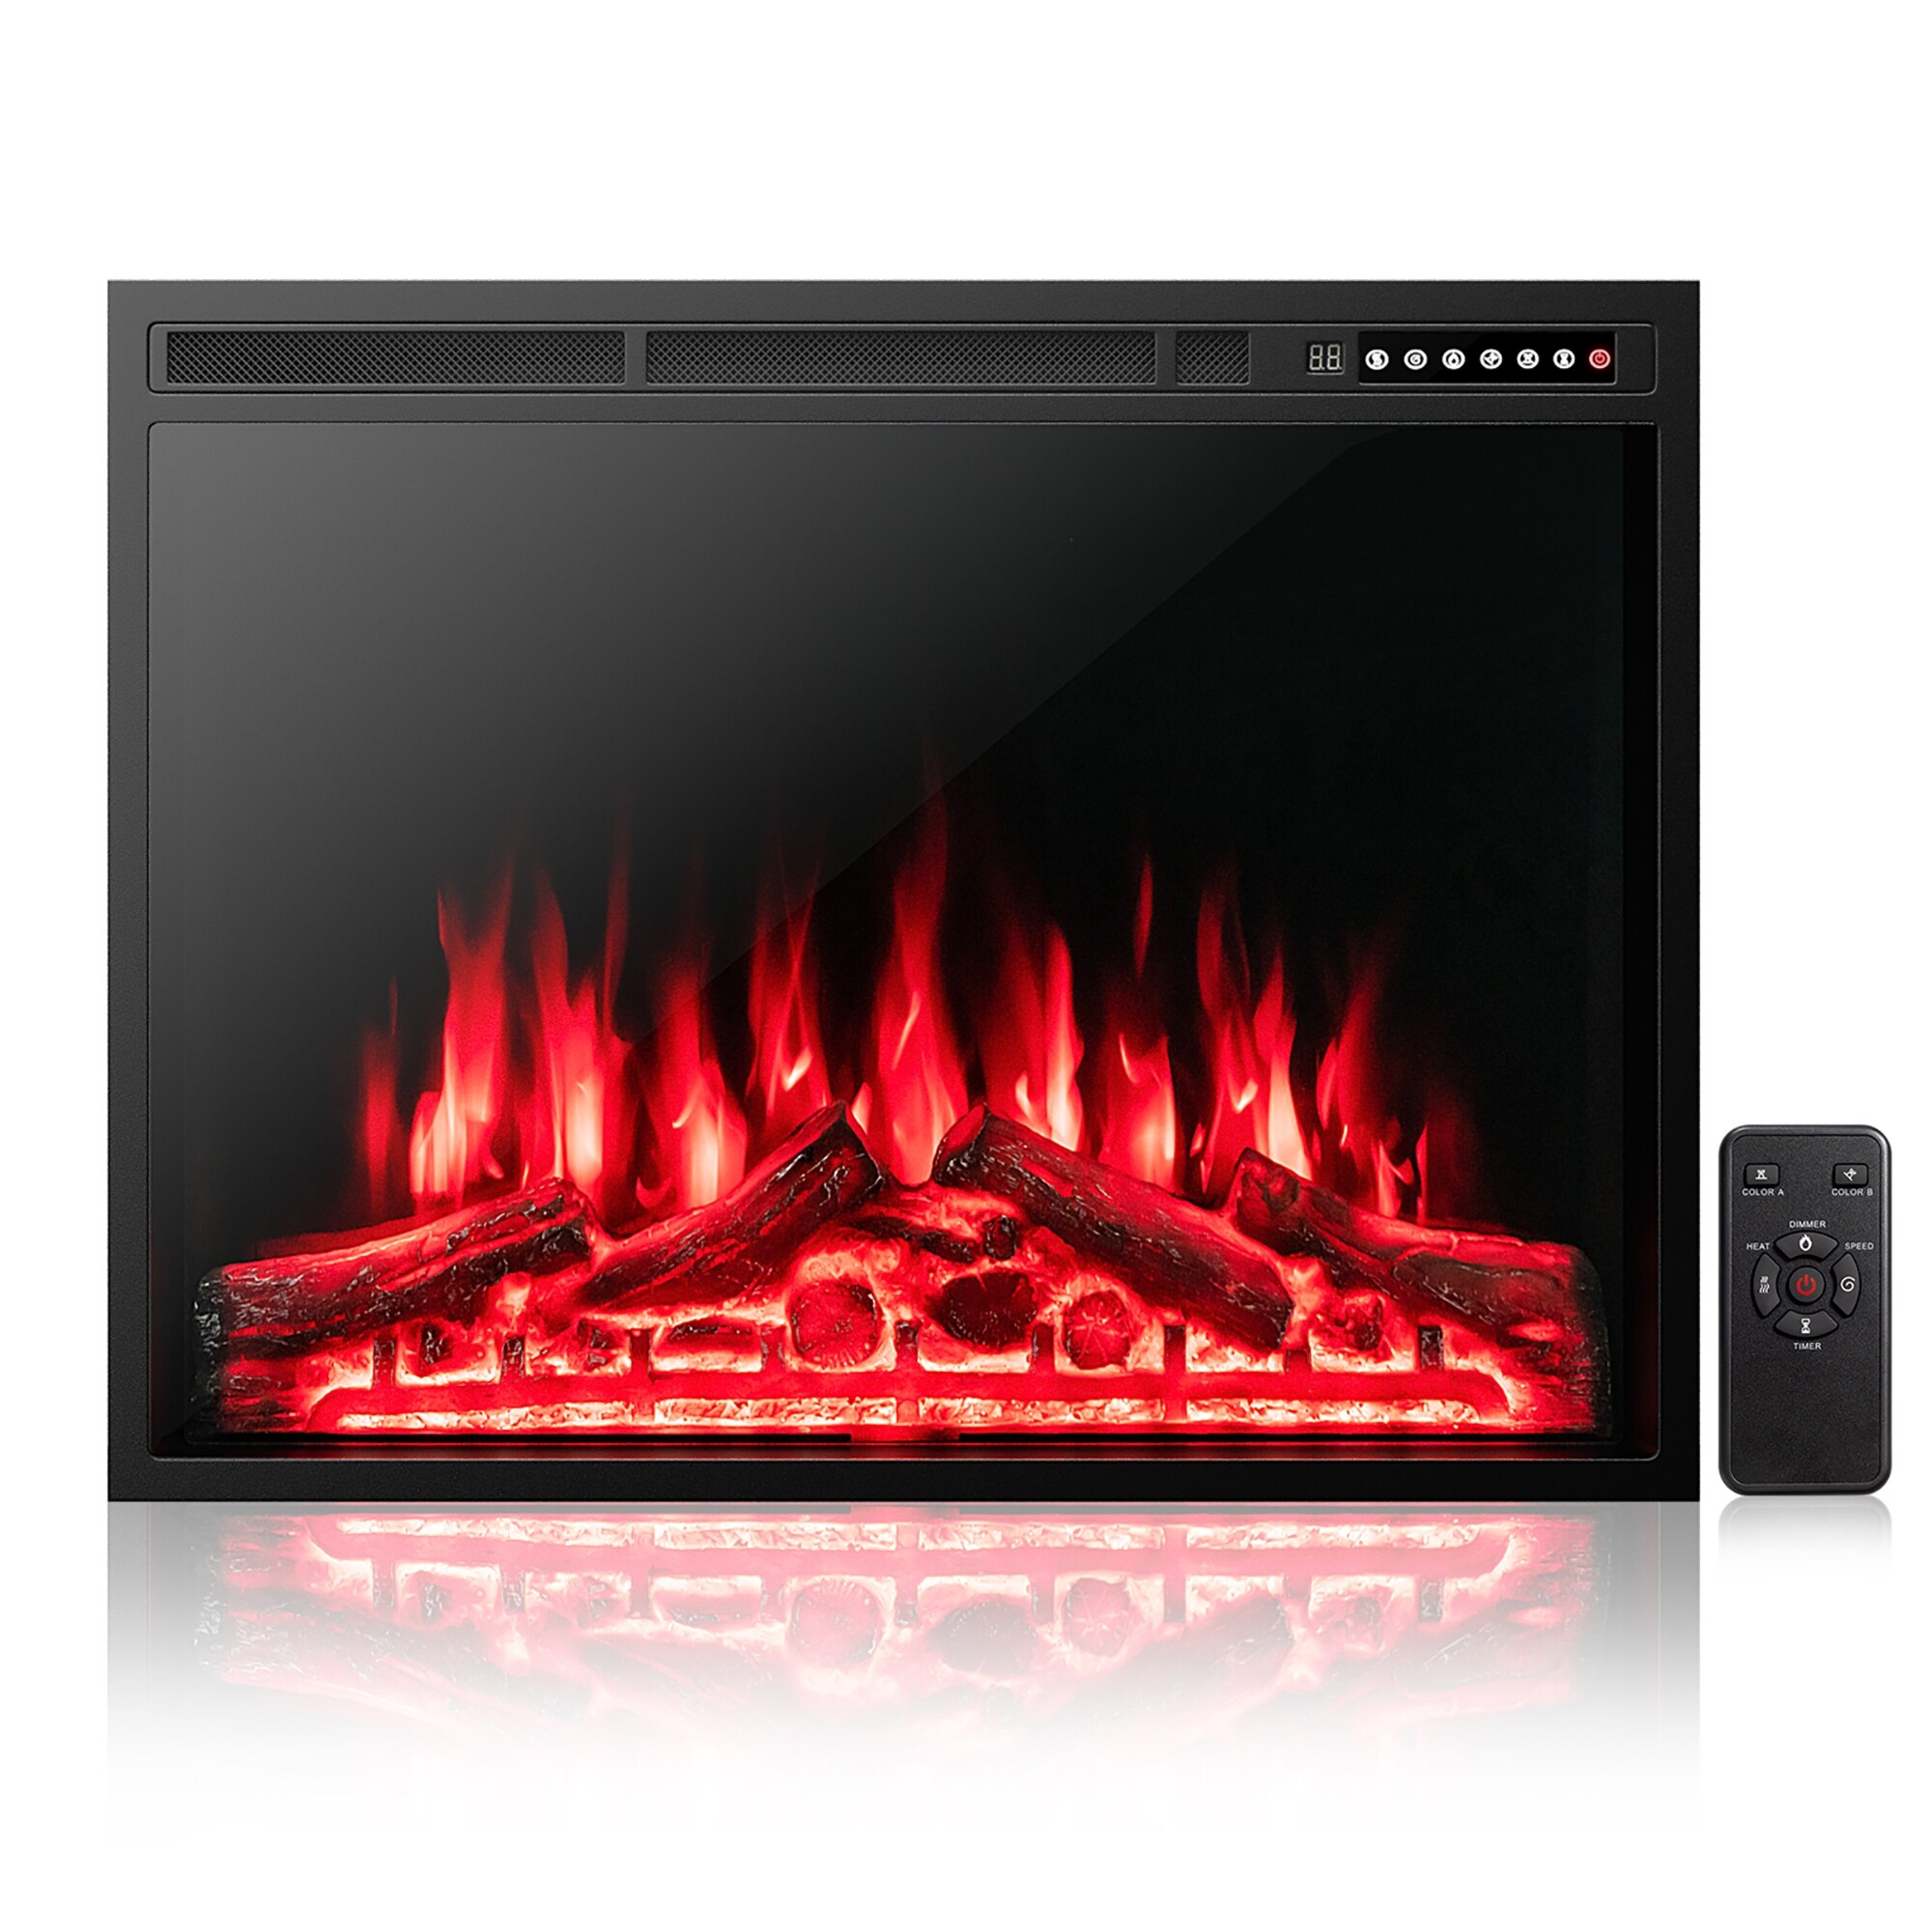 Costway 3437Electric Fireplace Insert Heater Log Flame Effect with